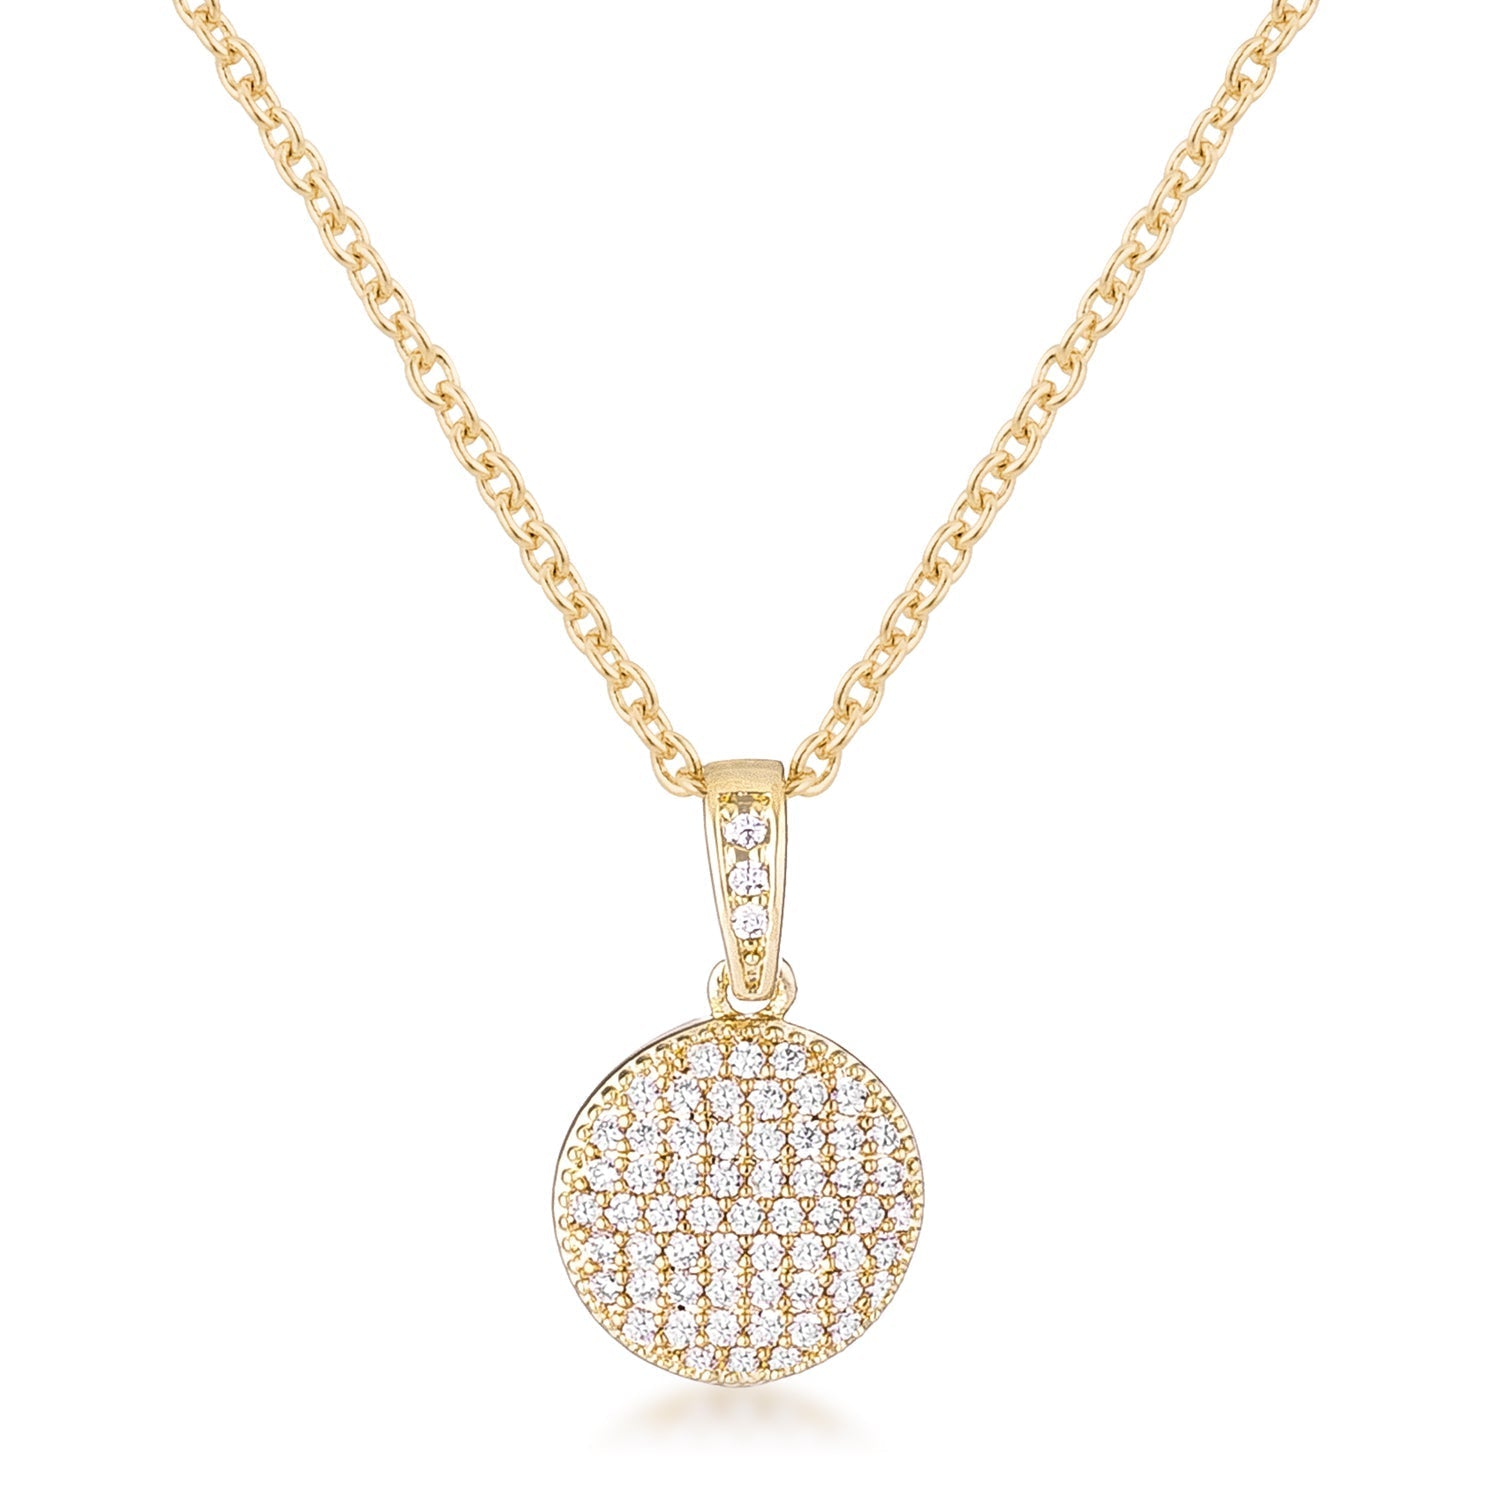 Gold Plated Necklace with CZ Disk Pendant - LinkagejewelrydesignLinkagejewelrydesign